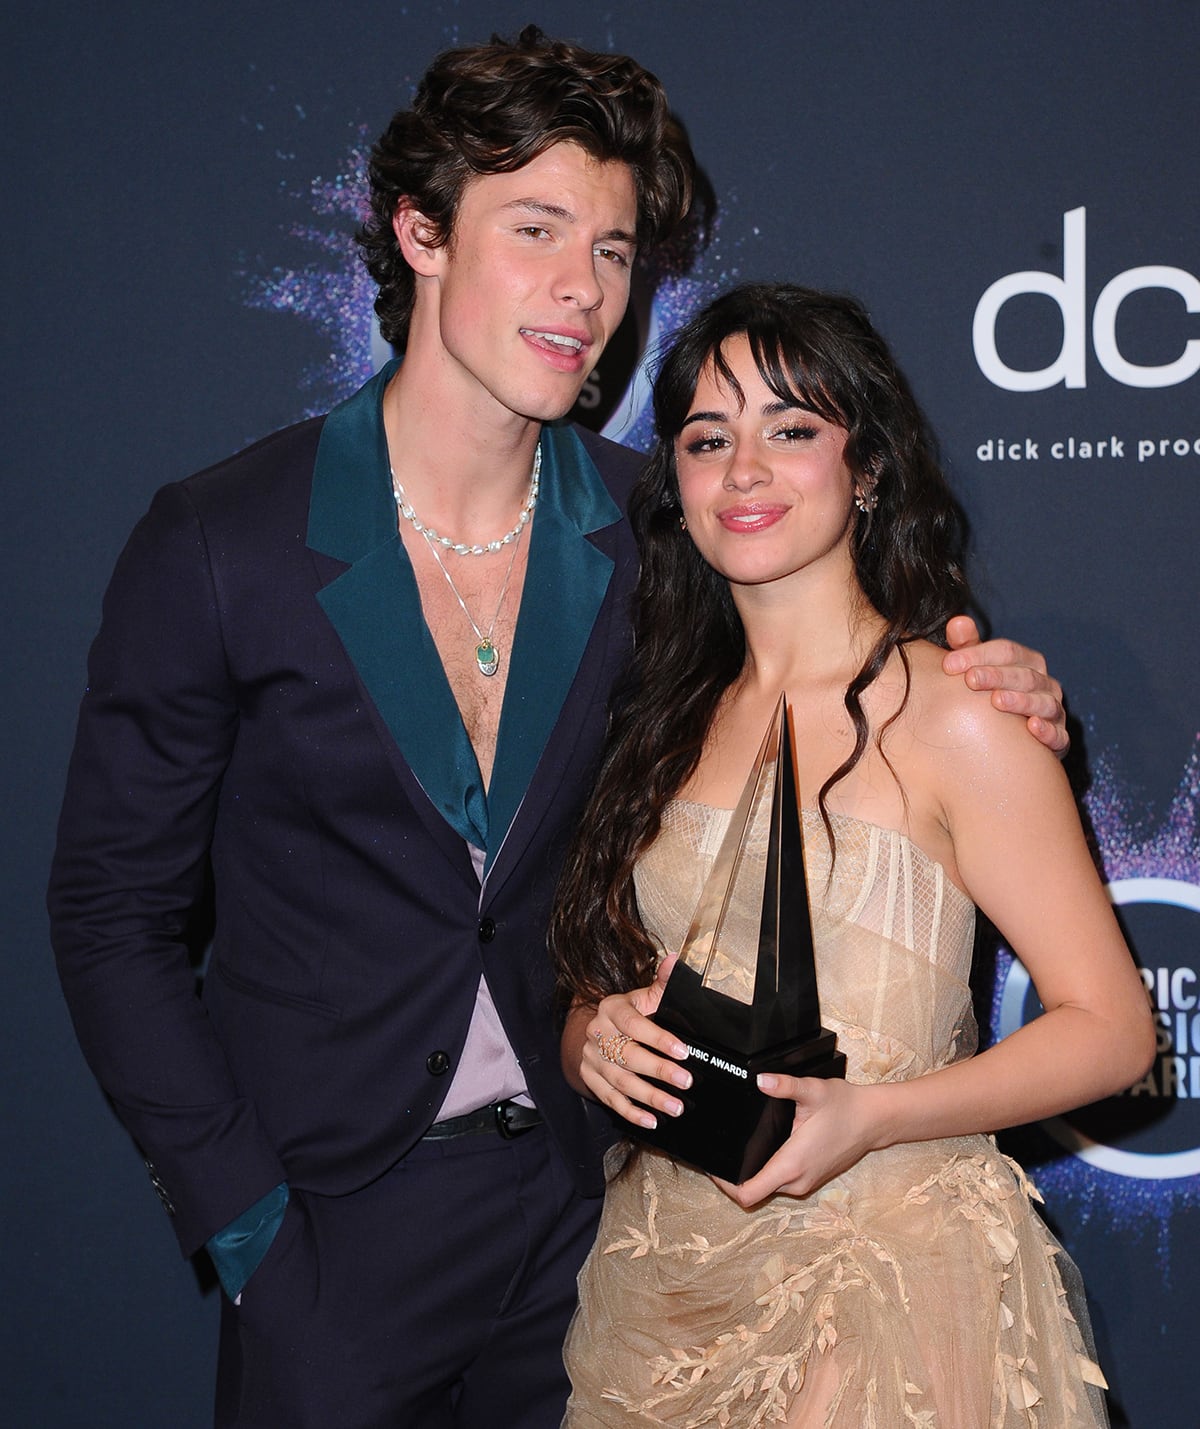 Shawn Mendes and Camila Cabello win Collaboration of the Year for their hit song Señorita at the 2019 American Music Awards